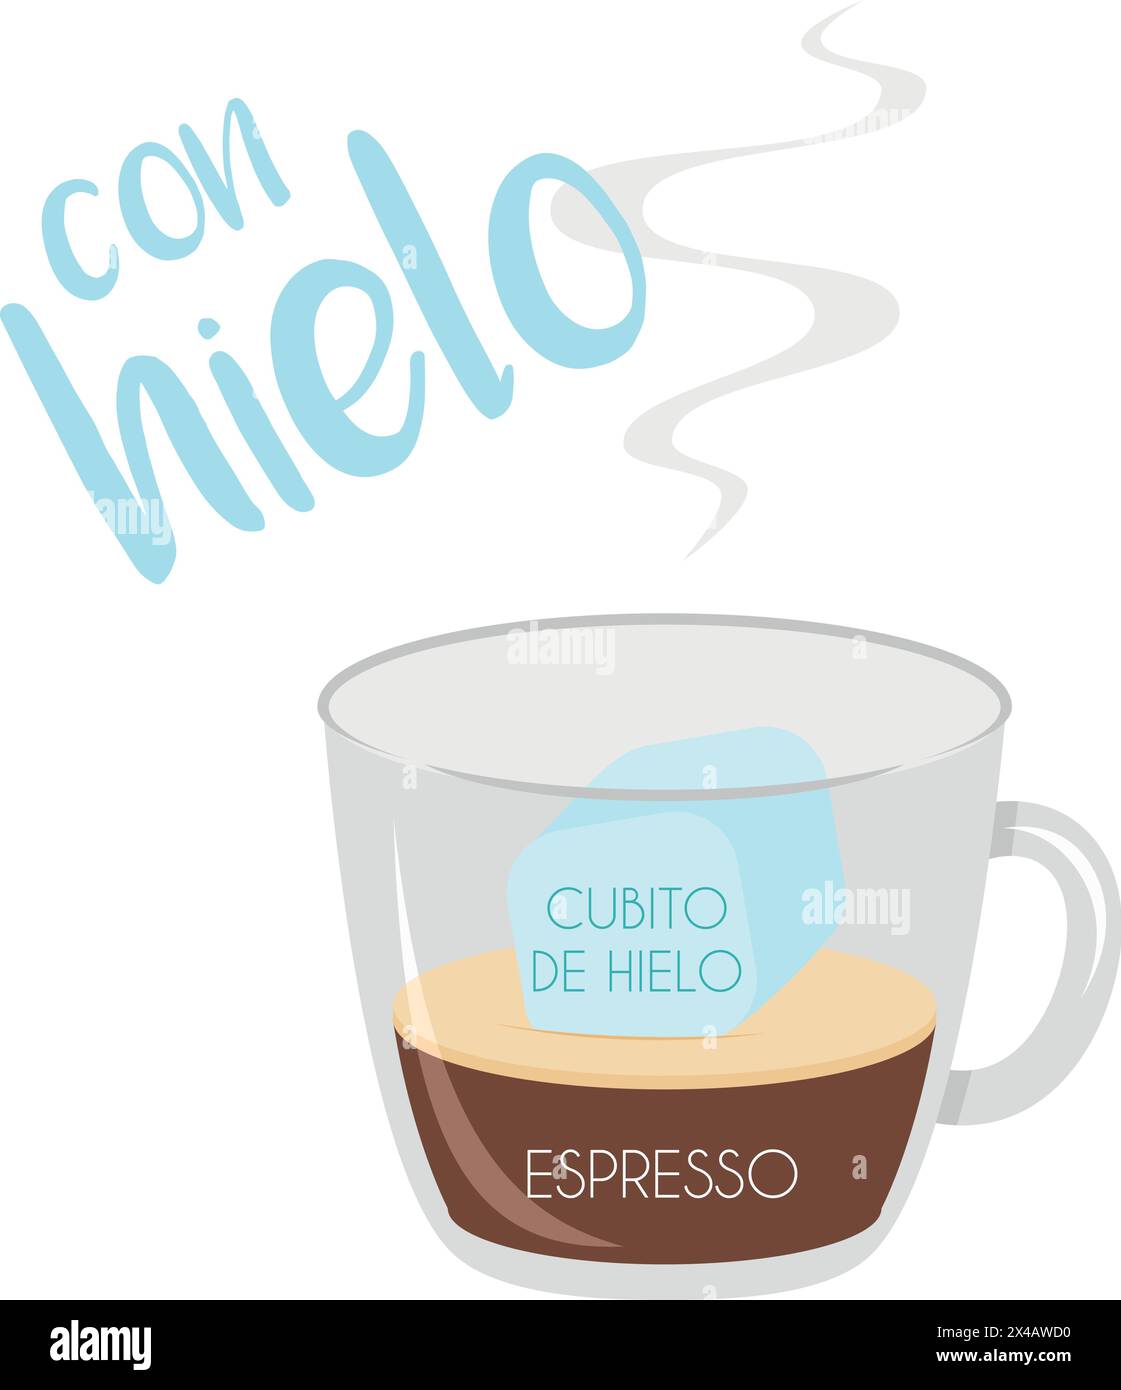 Vector illustration of an Espresso with ice coffee cup icon with its preparation and proportions and names in spanish. Stock Vector